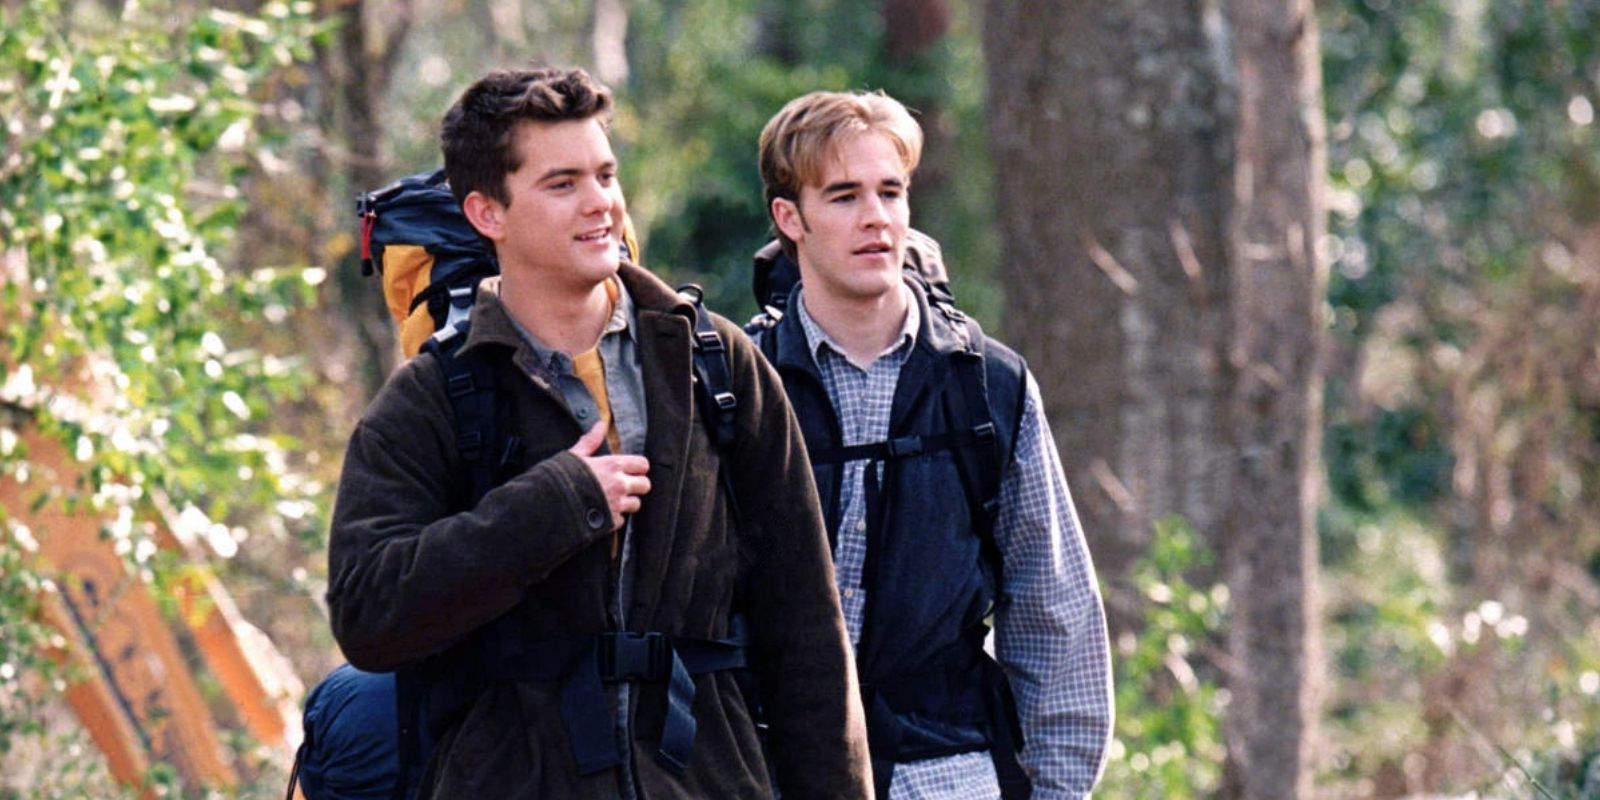 Pacey And Dawson In In Dawsons Creek